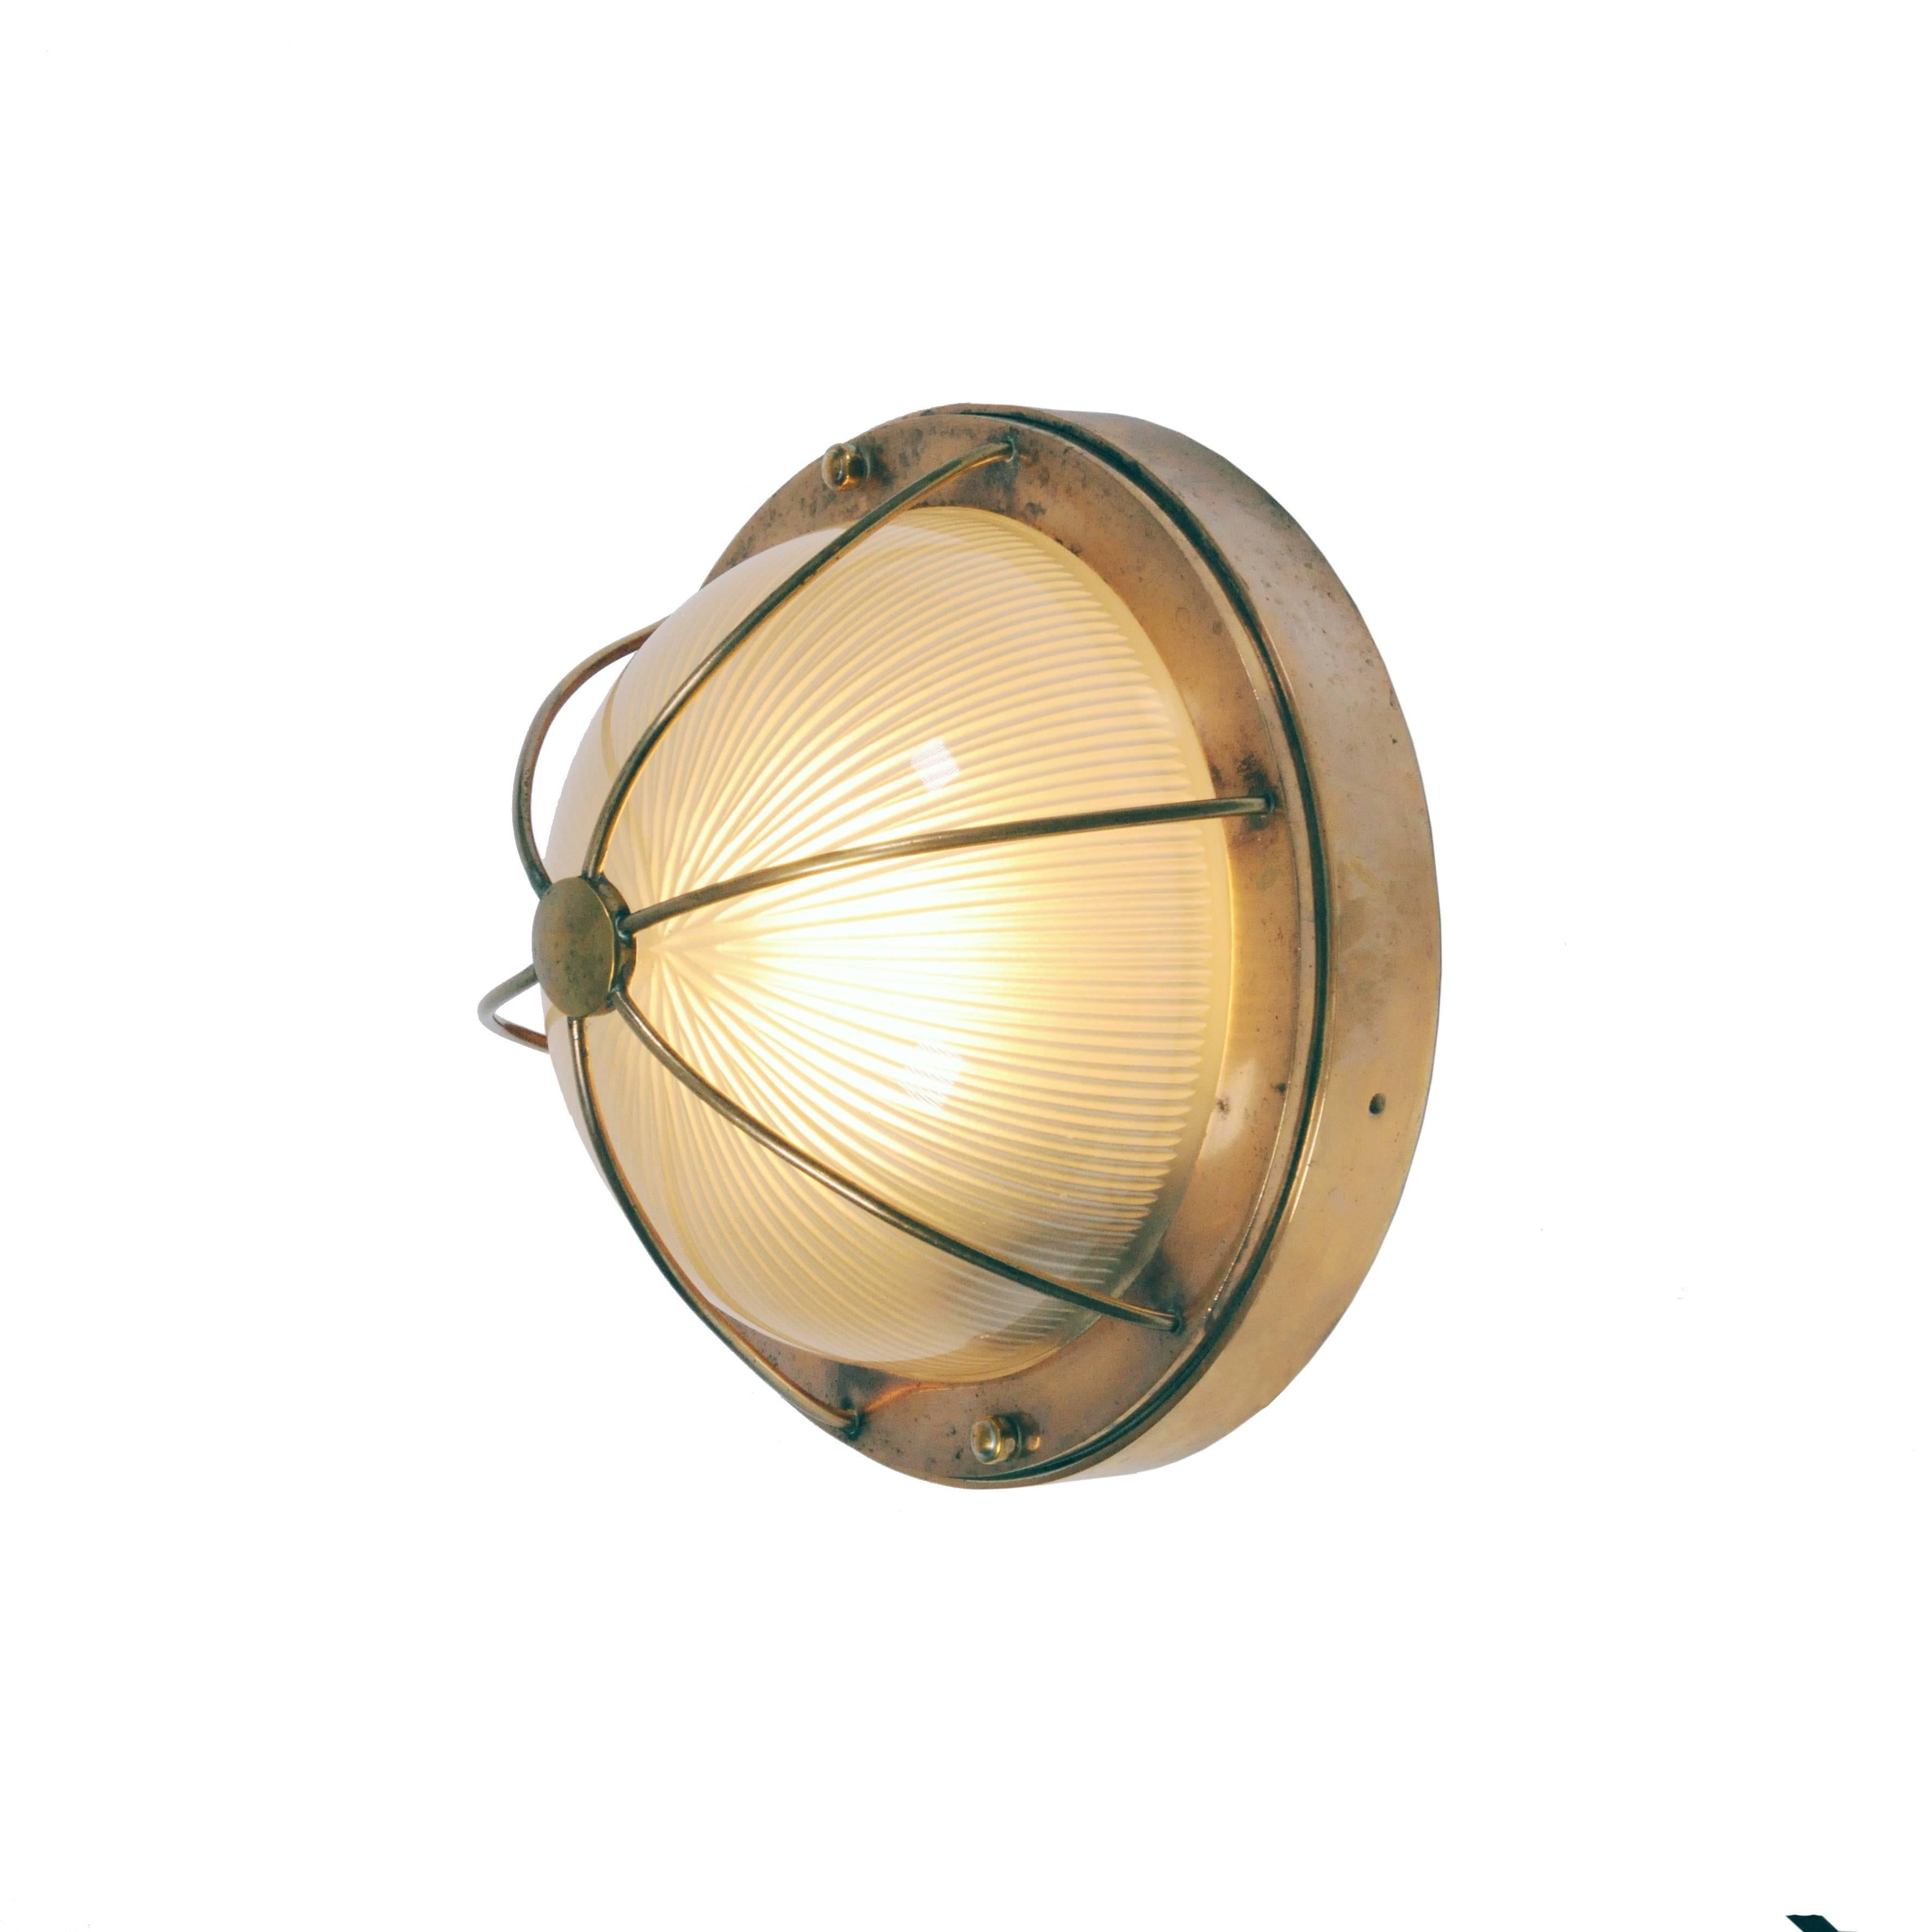 A rare ship liner ceiling or wall light with a striking quality prismatic glass dome made by Holophane. The glass shade is protected by a beautiful brass cage. The quality of the Holophane glass shade is like crystal clear and enables the perfect